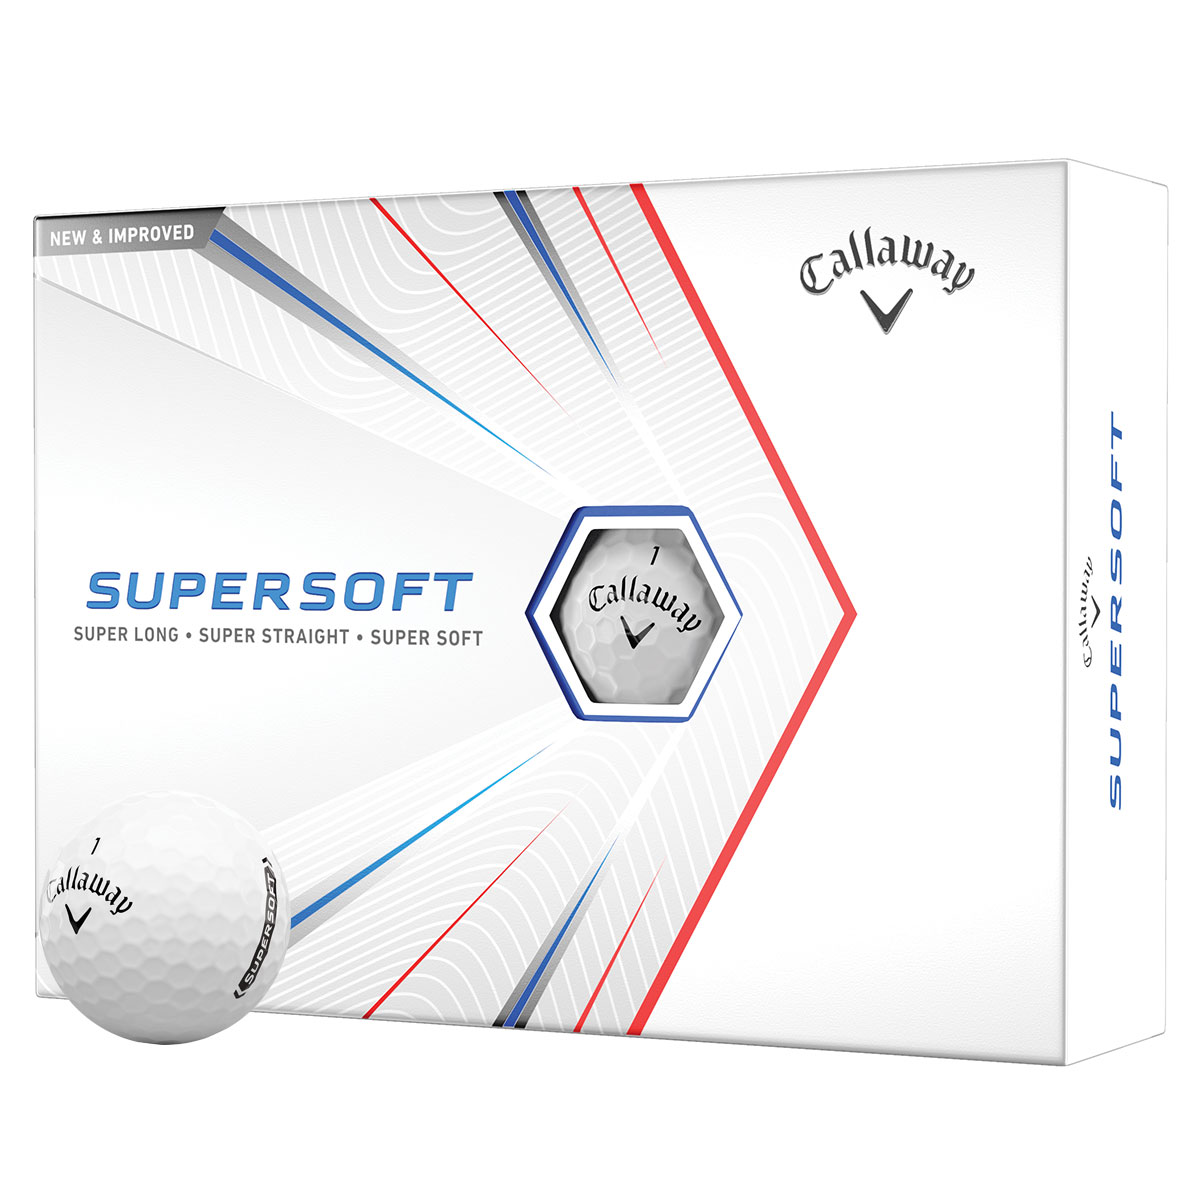 Callaway Supersoft 12 Golf Ball Pack from american golf